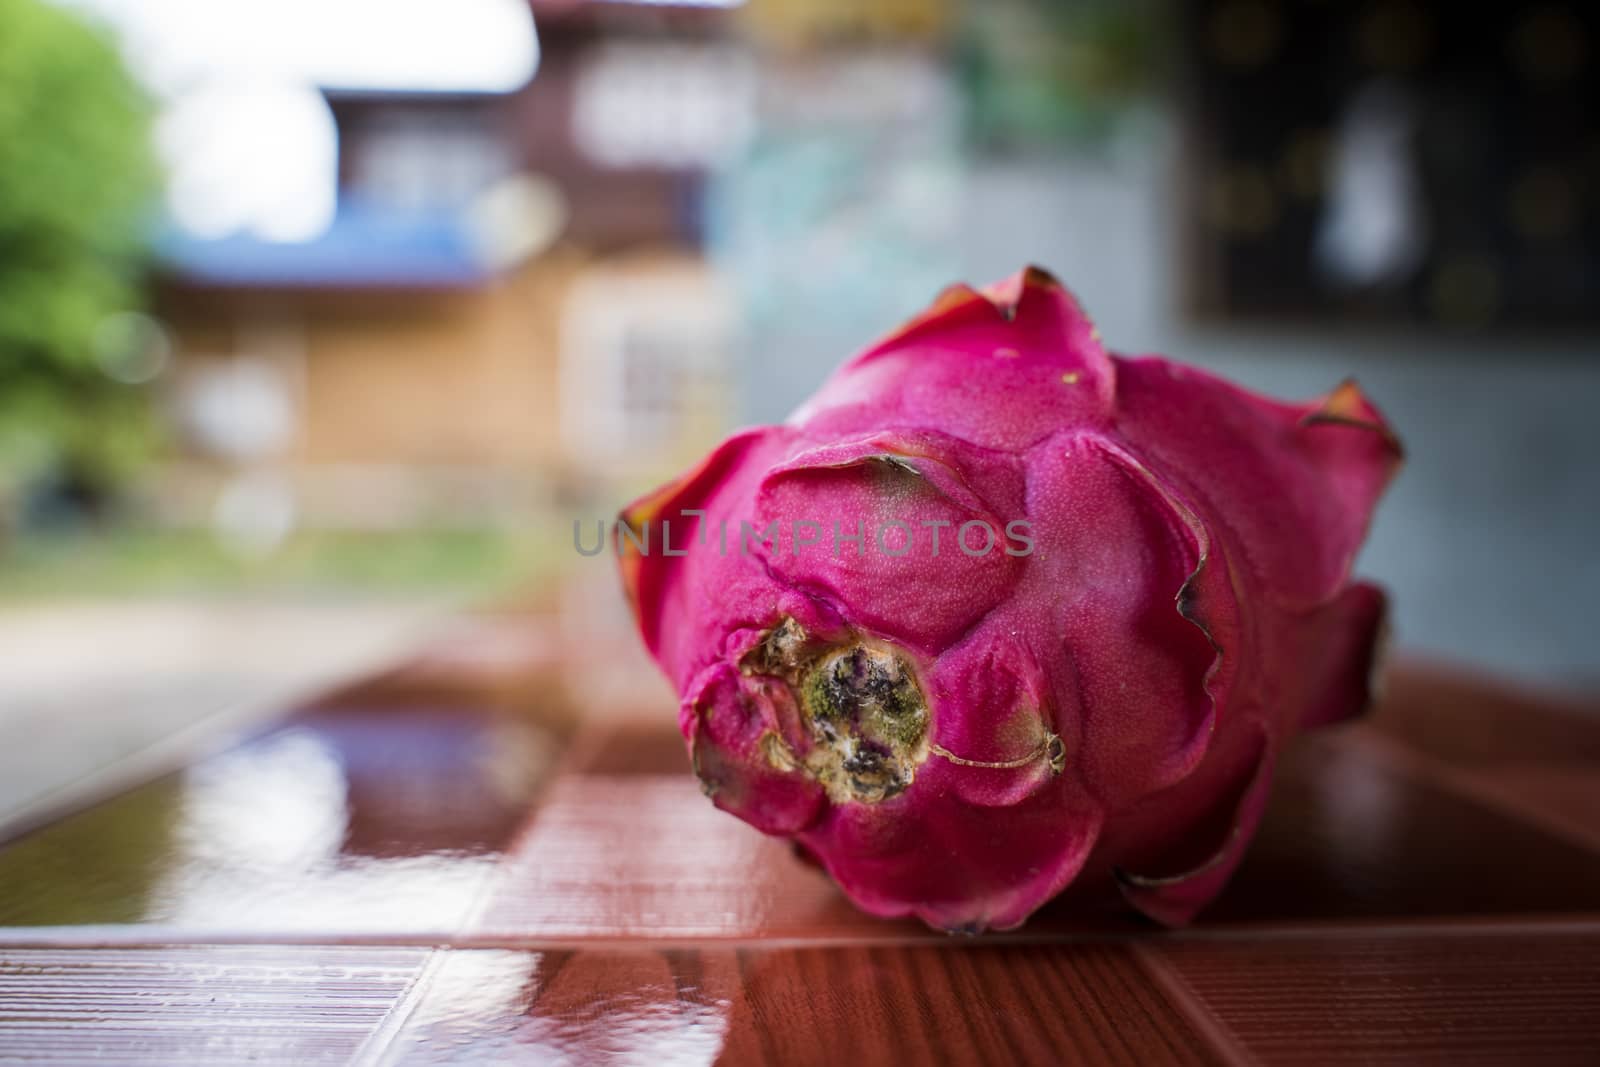 A Dragon fruit. (tropical fruit) on wooden background